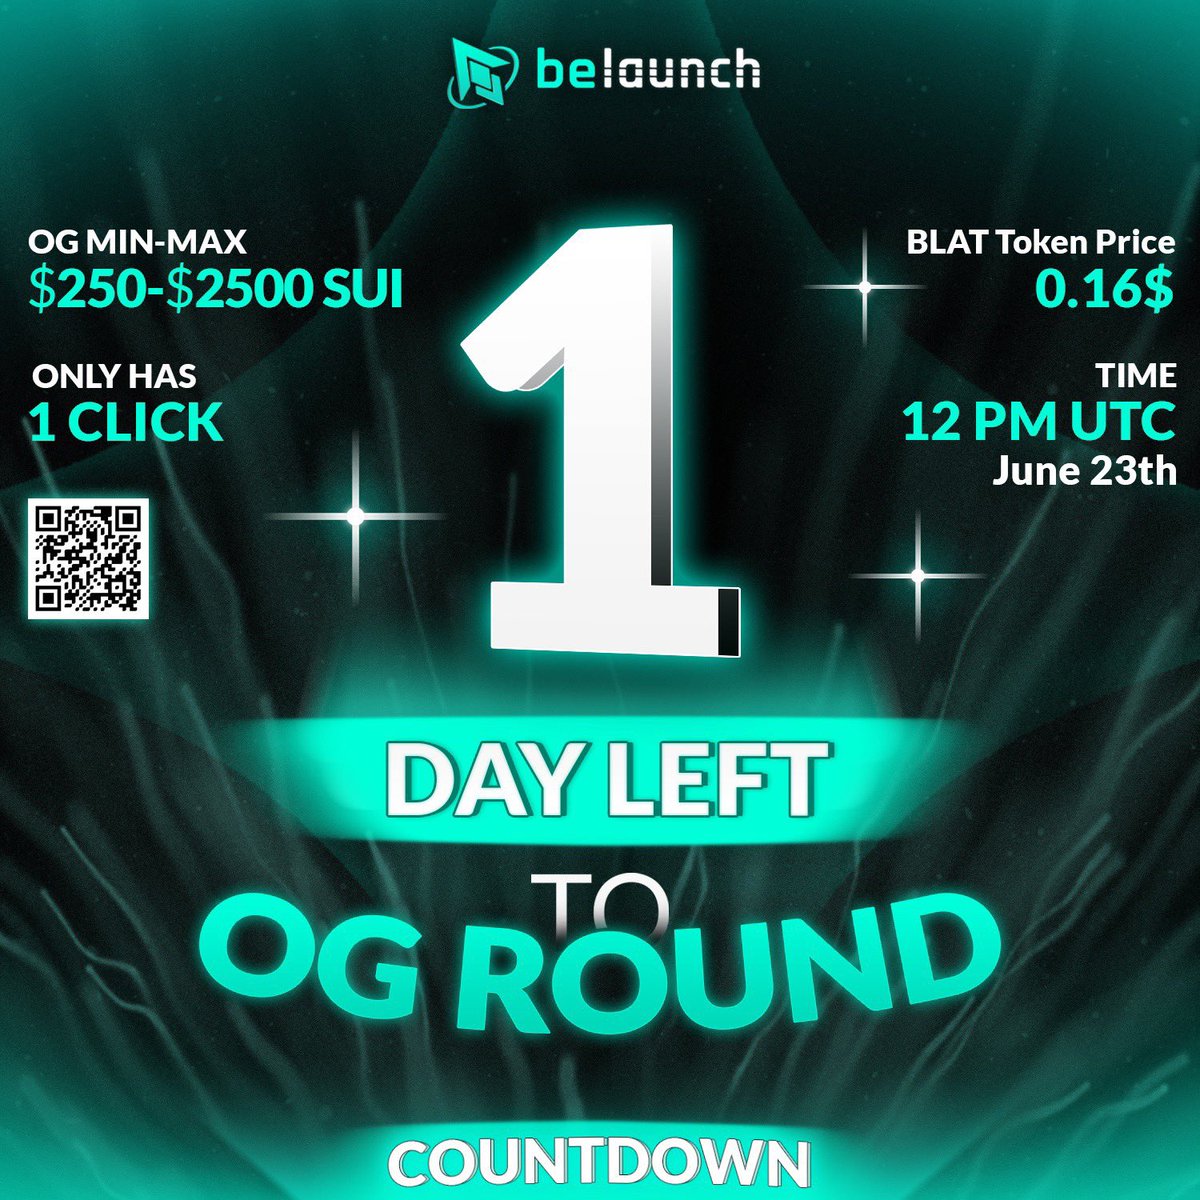 🚀 Only 1 days left until the #Belaunch IDO event! 🎉
📅 Date: June 23, 2023
💼 OG Role Min-Max: $250 - $2500
💰 BLAT Token Price: $0.16
🔥 Just one click away!

Get ready to secure your share of BLAT tokens with a single click! 🌟

#Crypto #IDO #BLATToken #BelaunchCommunity